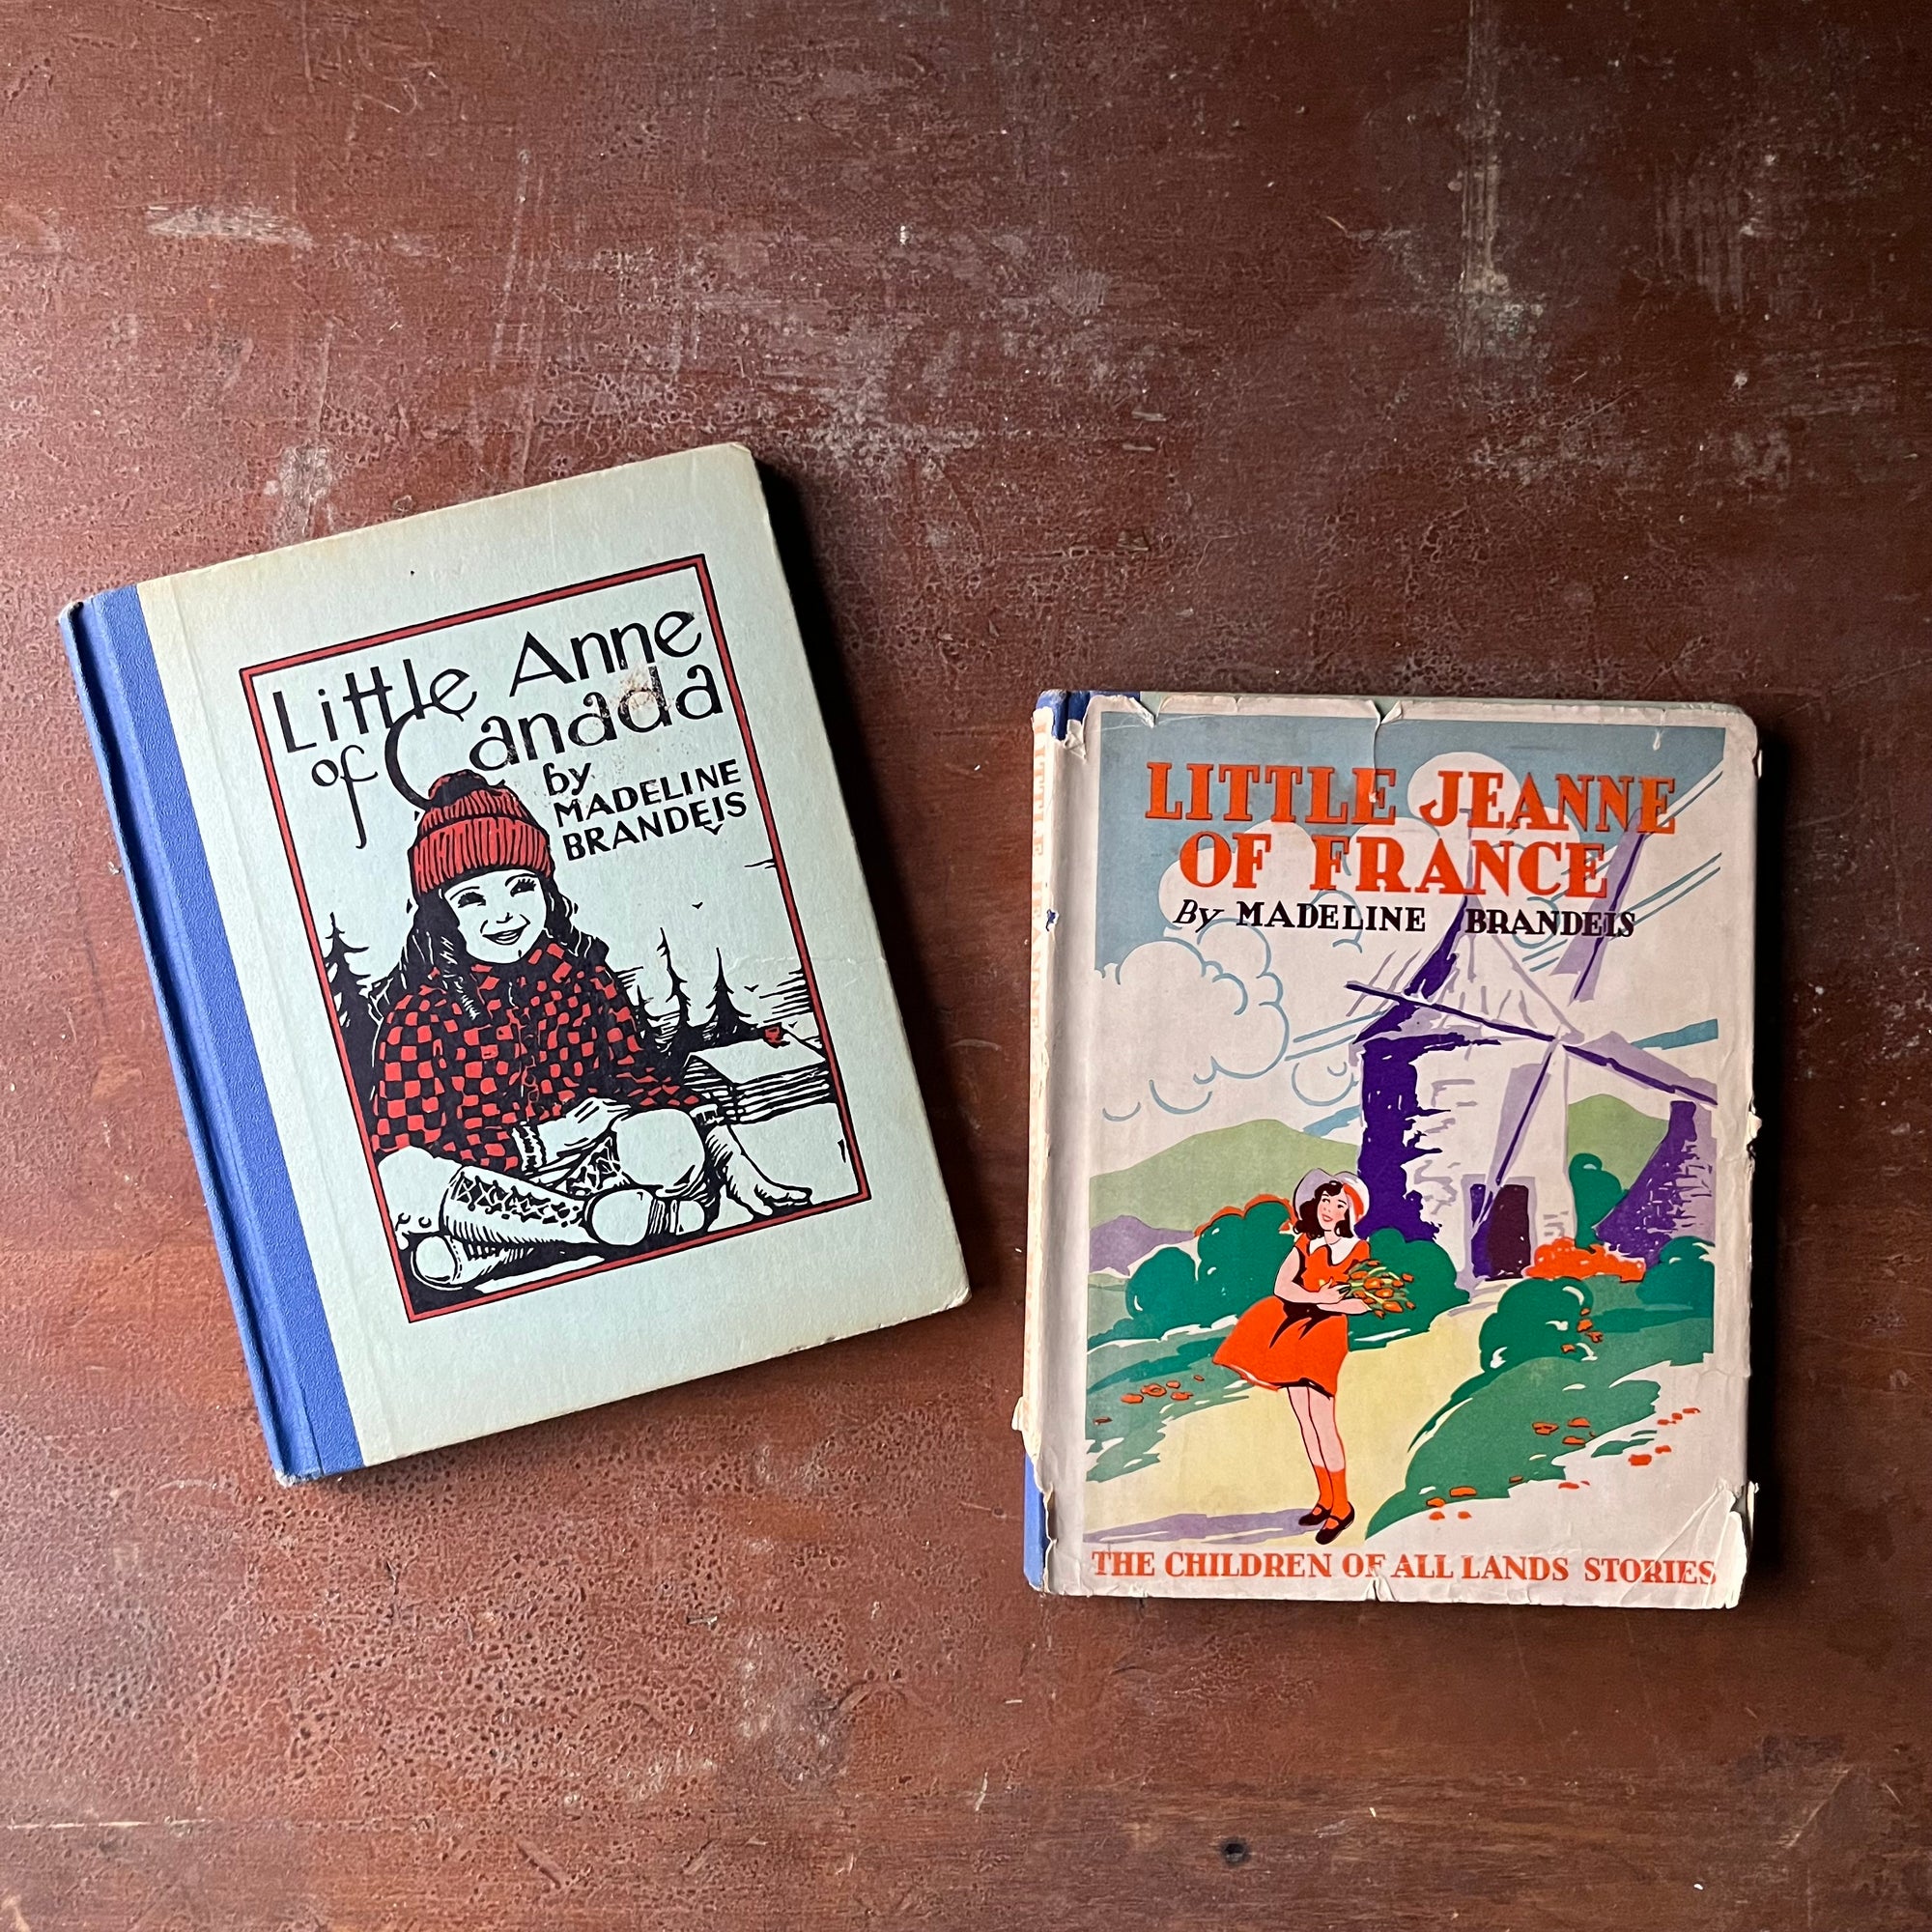 The Children of All Lands Book Set:  Little Anne of Canada & Little Jeanne of France